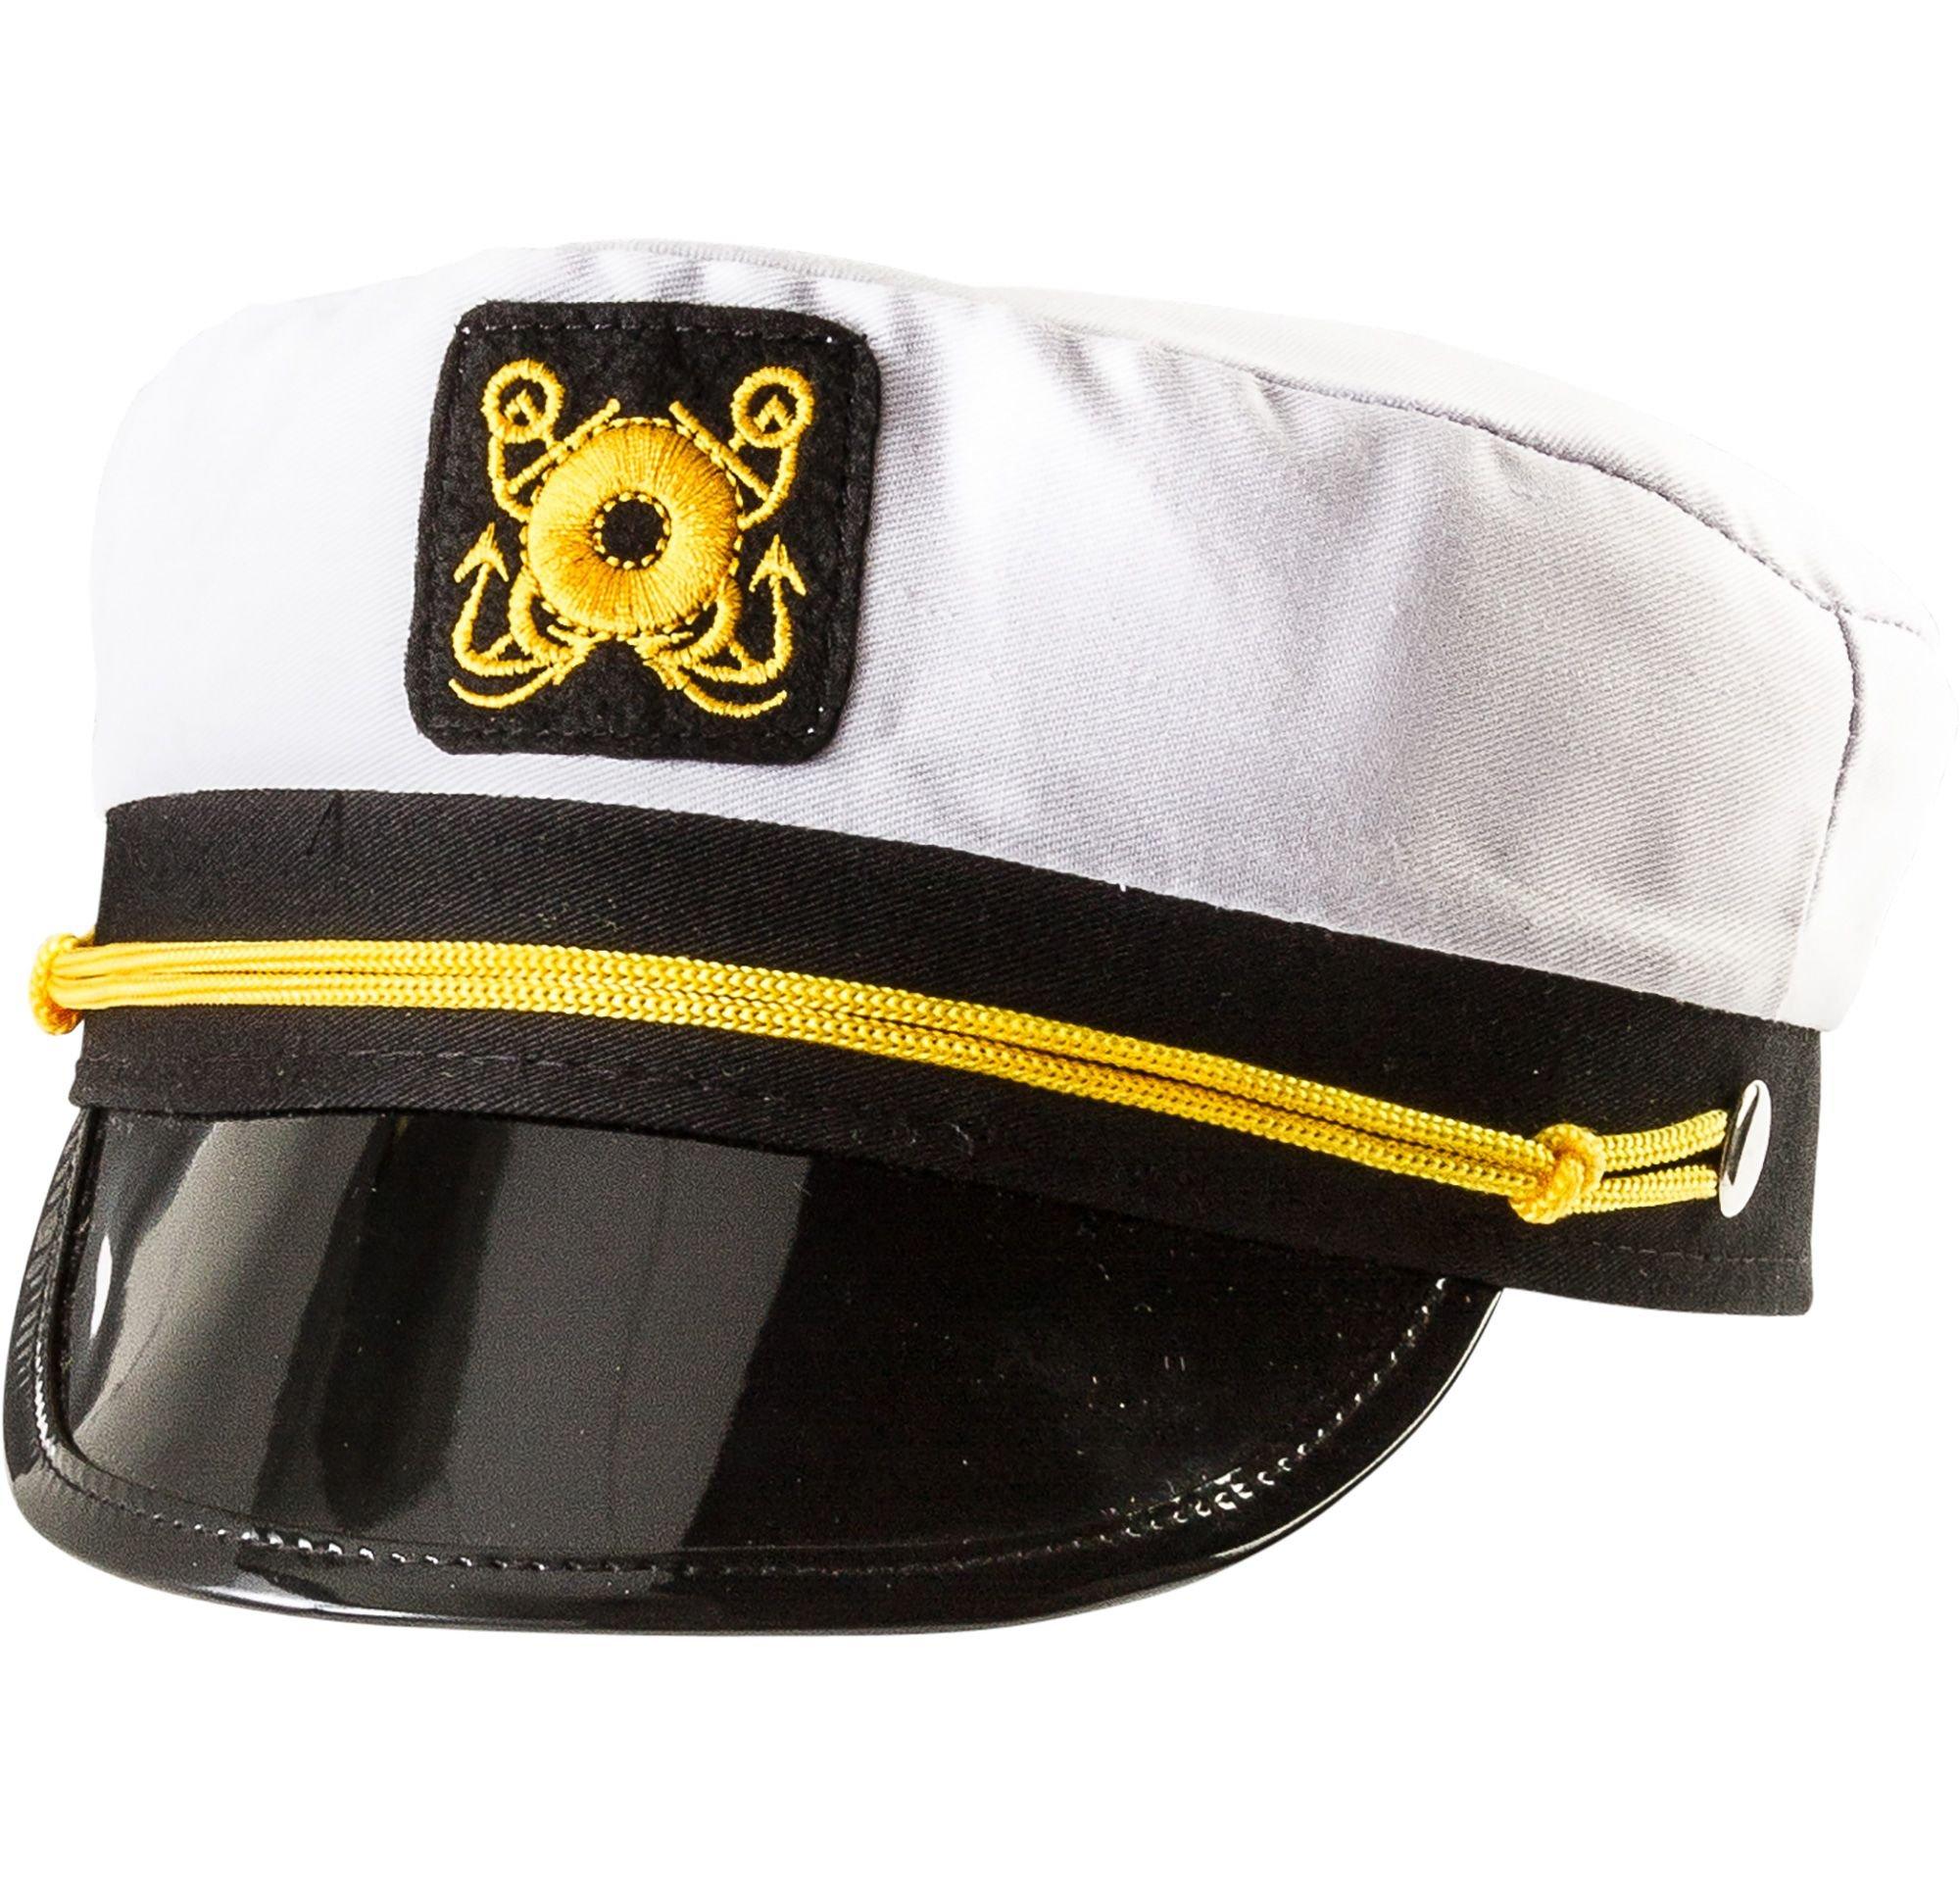 how to make a sailor hat